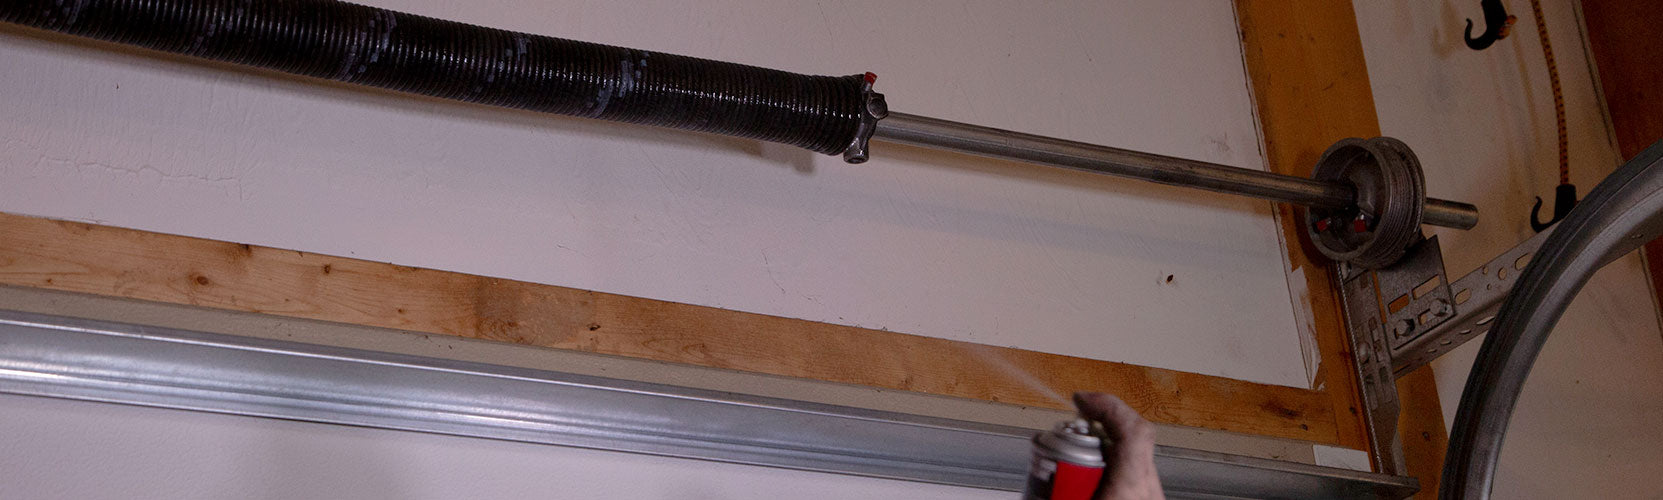 How to Safely Maintain Garage Door Torsion Springs in 5 Easy Steps